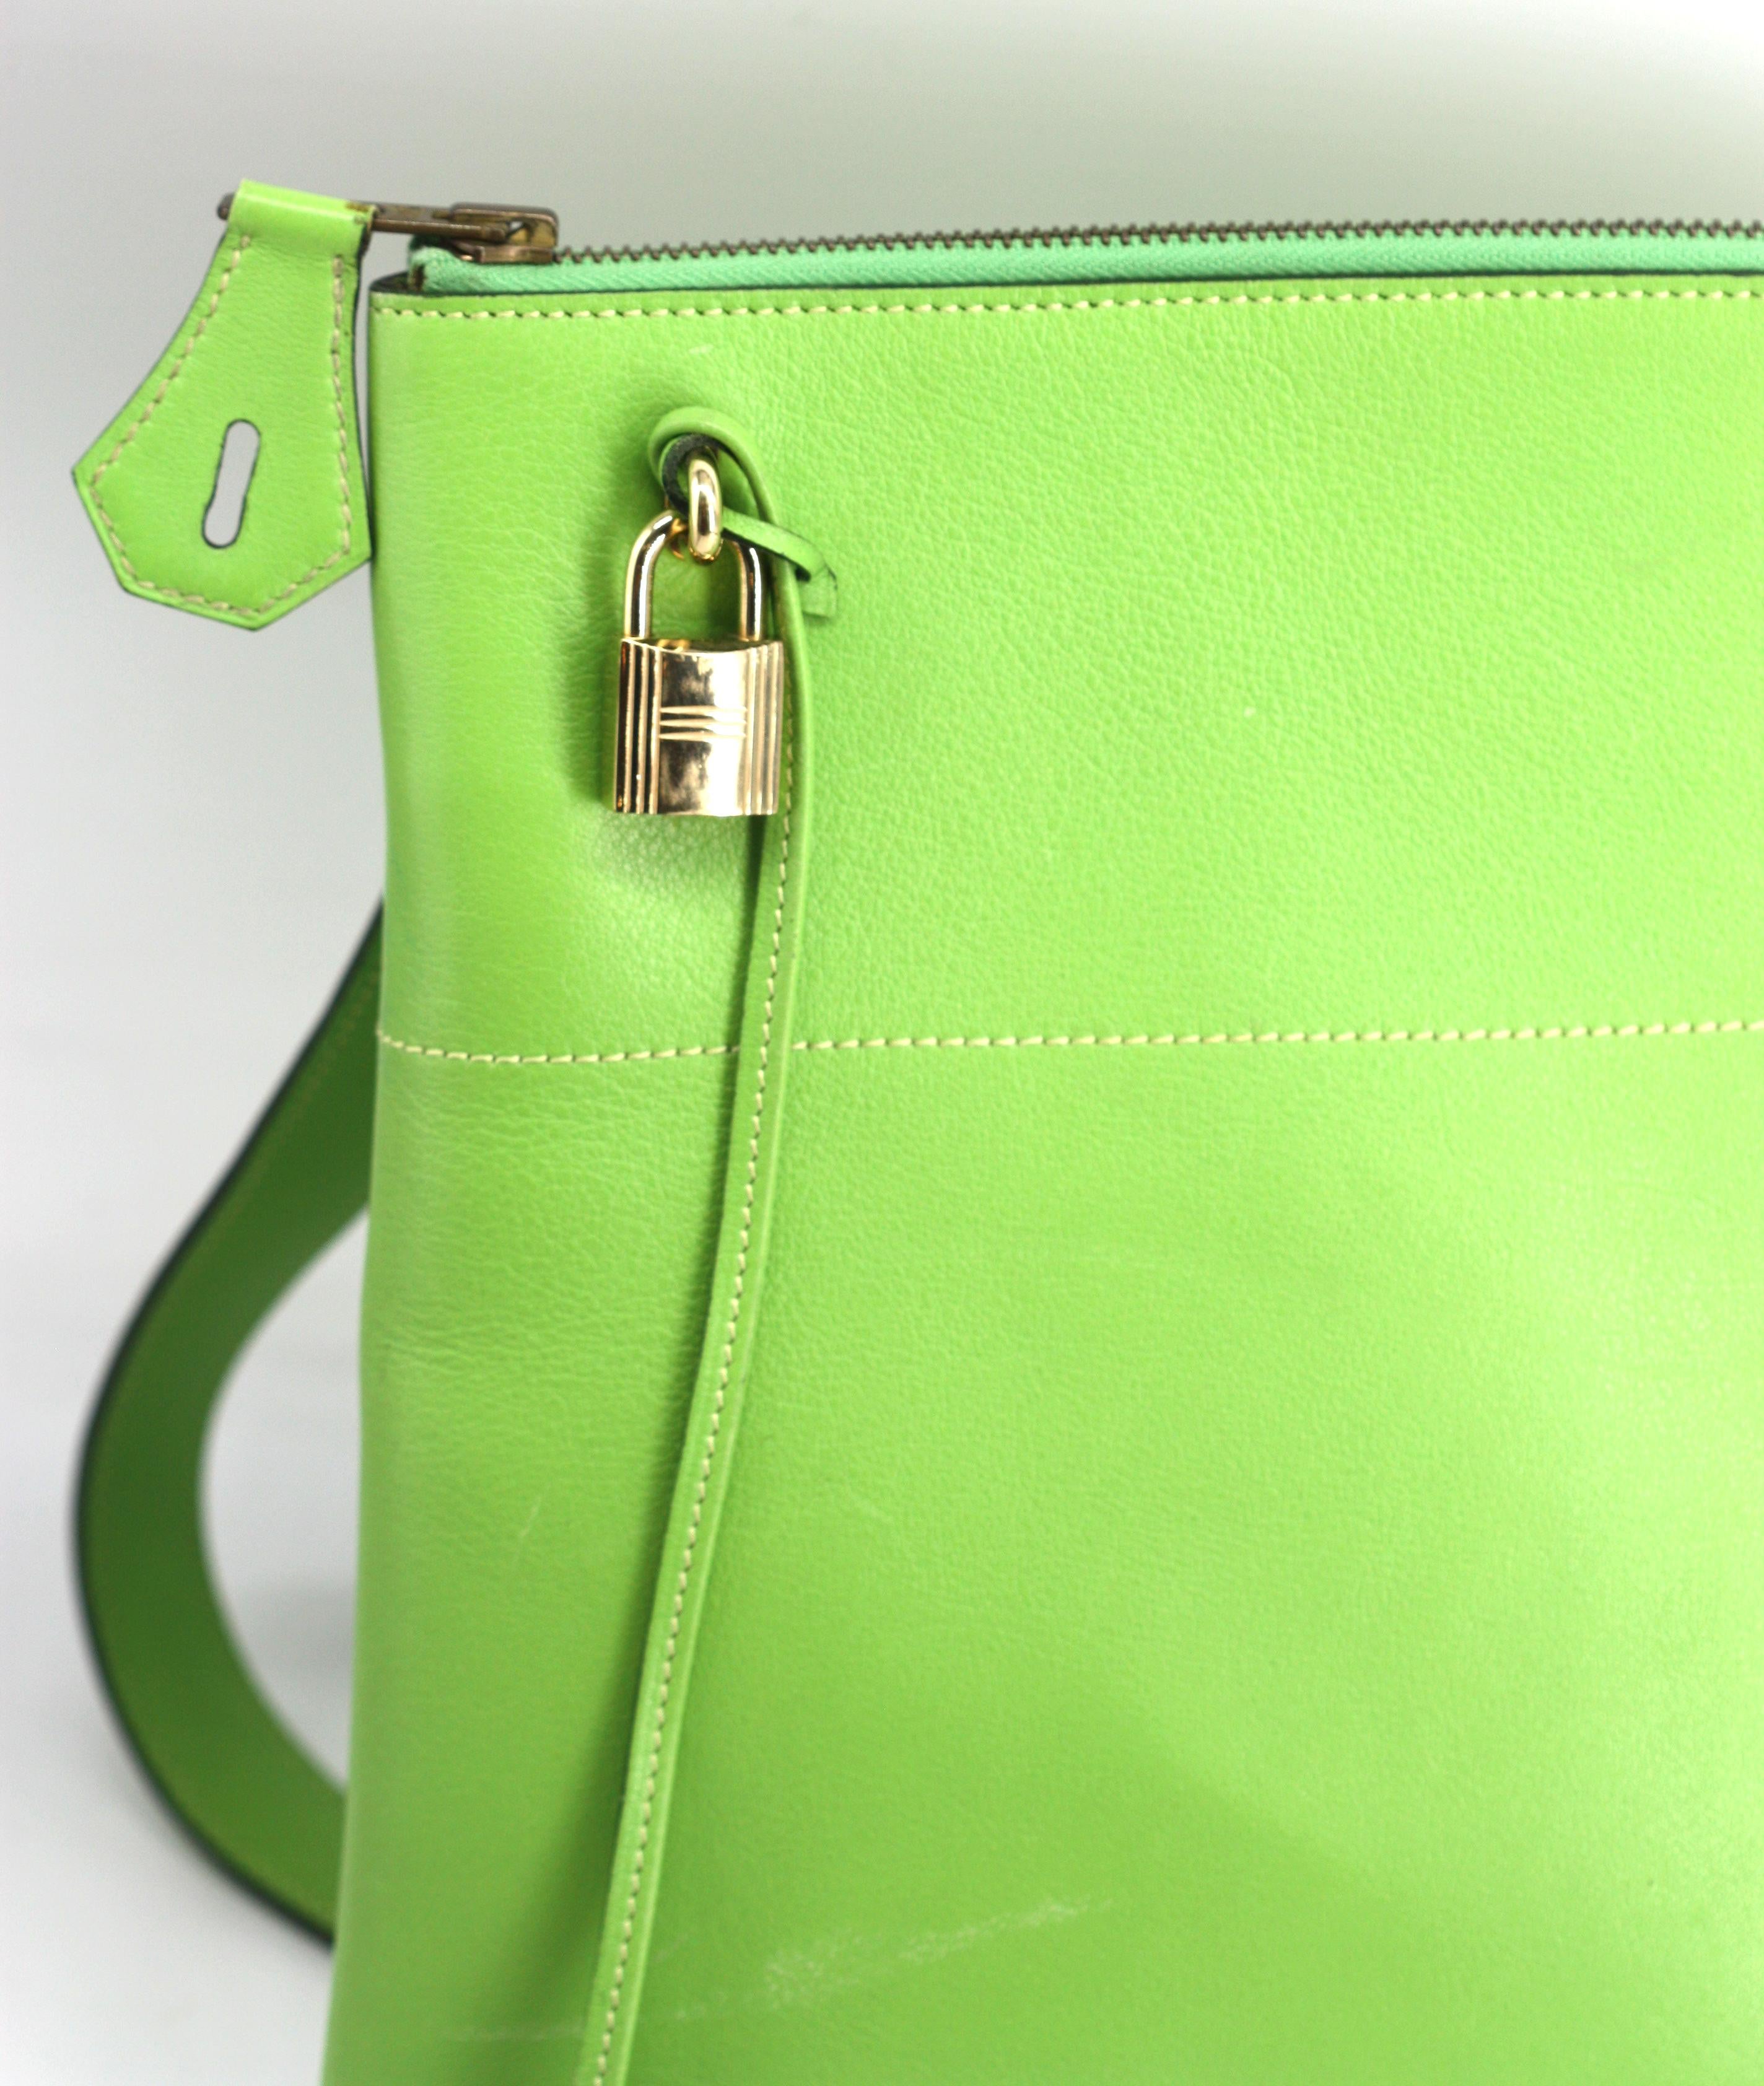 
Hermes Kiwi Green Calfs Leather Shoulder Bag
The leather stamped Hermes Paris Made in France, the inside zipper impressed Hermes, the exterior zipper marked Eclair, the lock and keys marked Hermes 104. Oval shaped bottom, one upper corned rounded